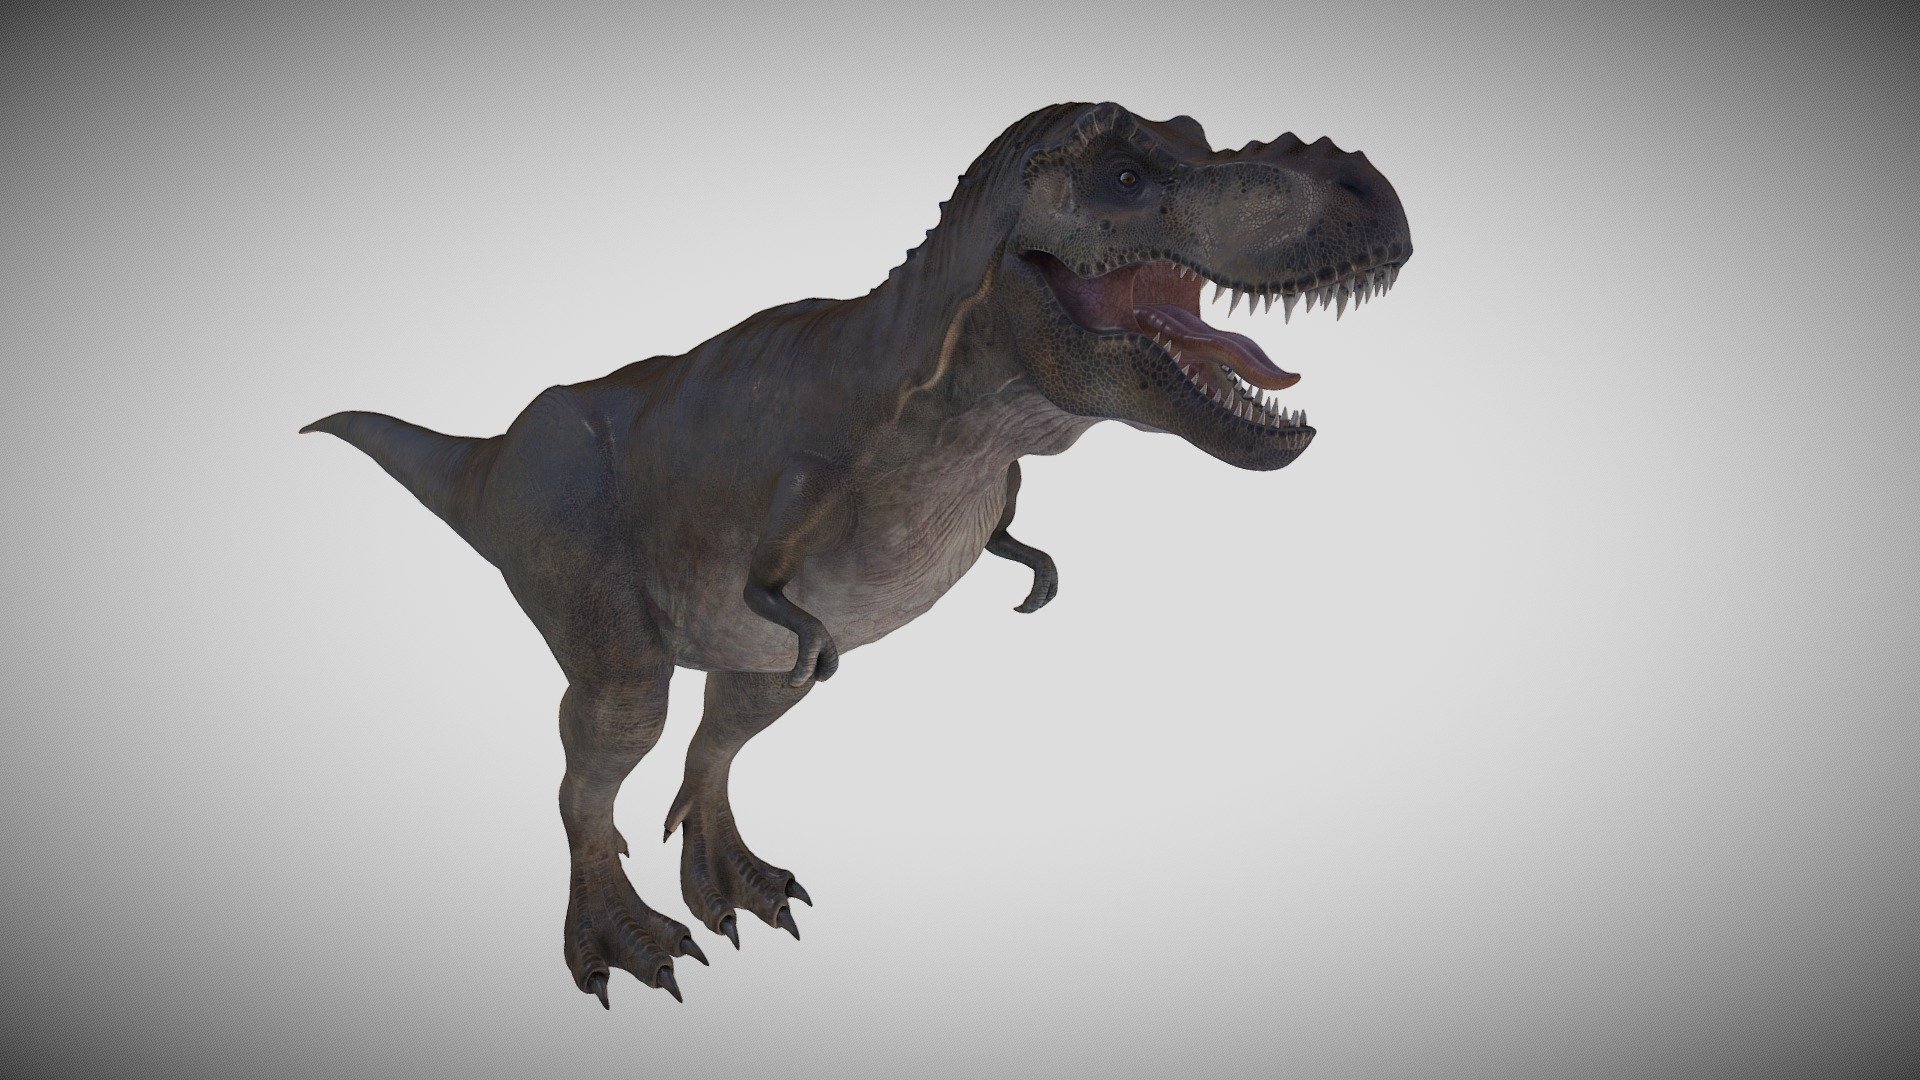 T-rex 3d model.
The main body texture is 8K
Others 1k.
Hope you like it 3d model